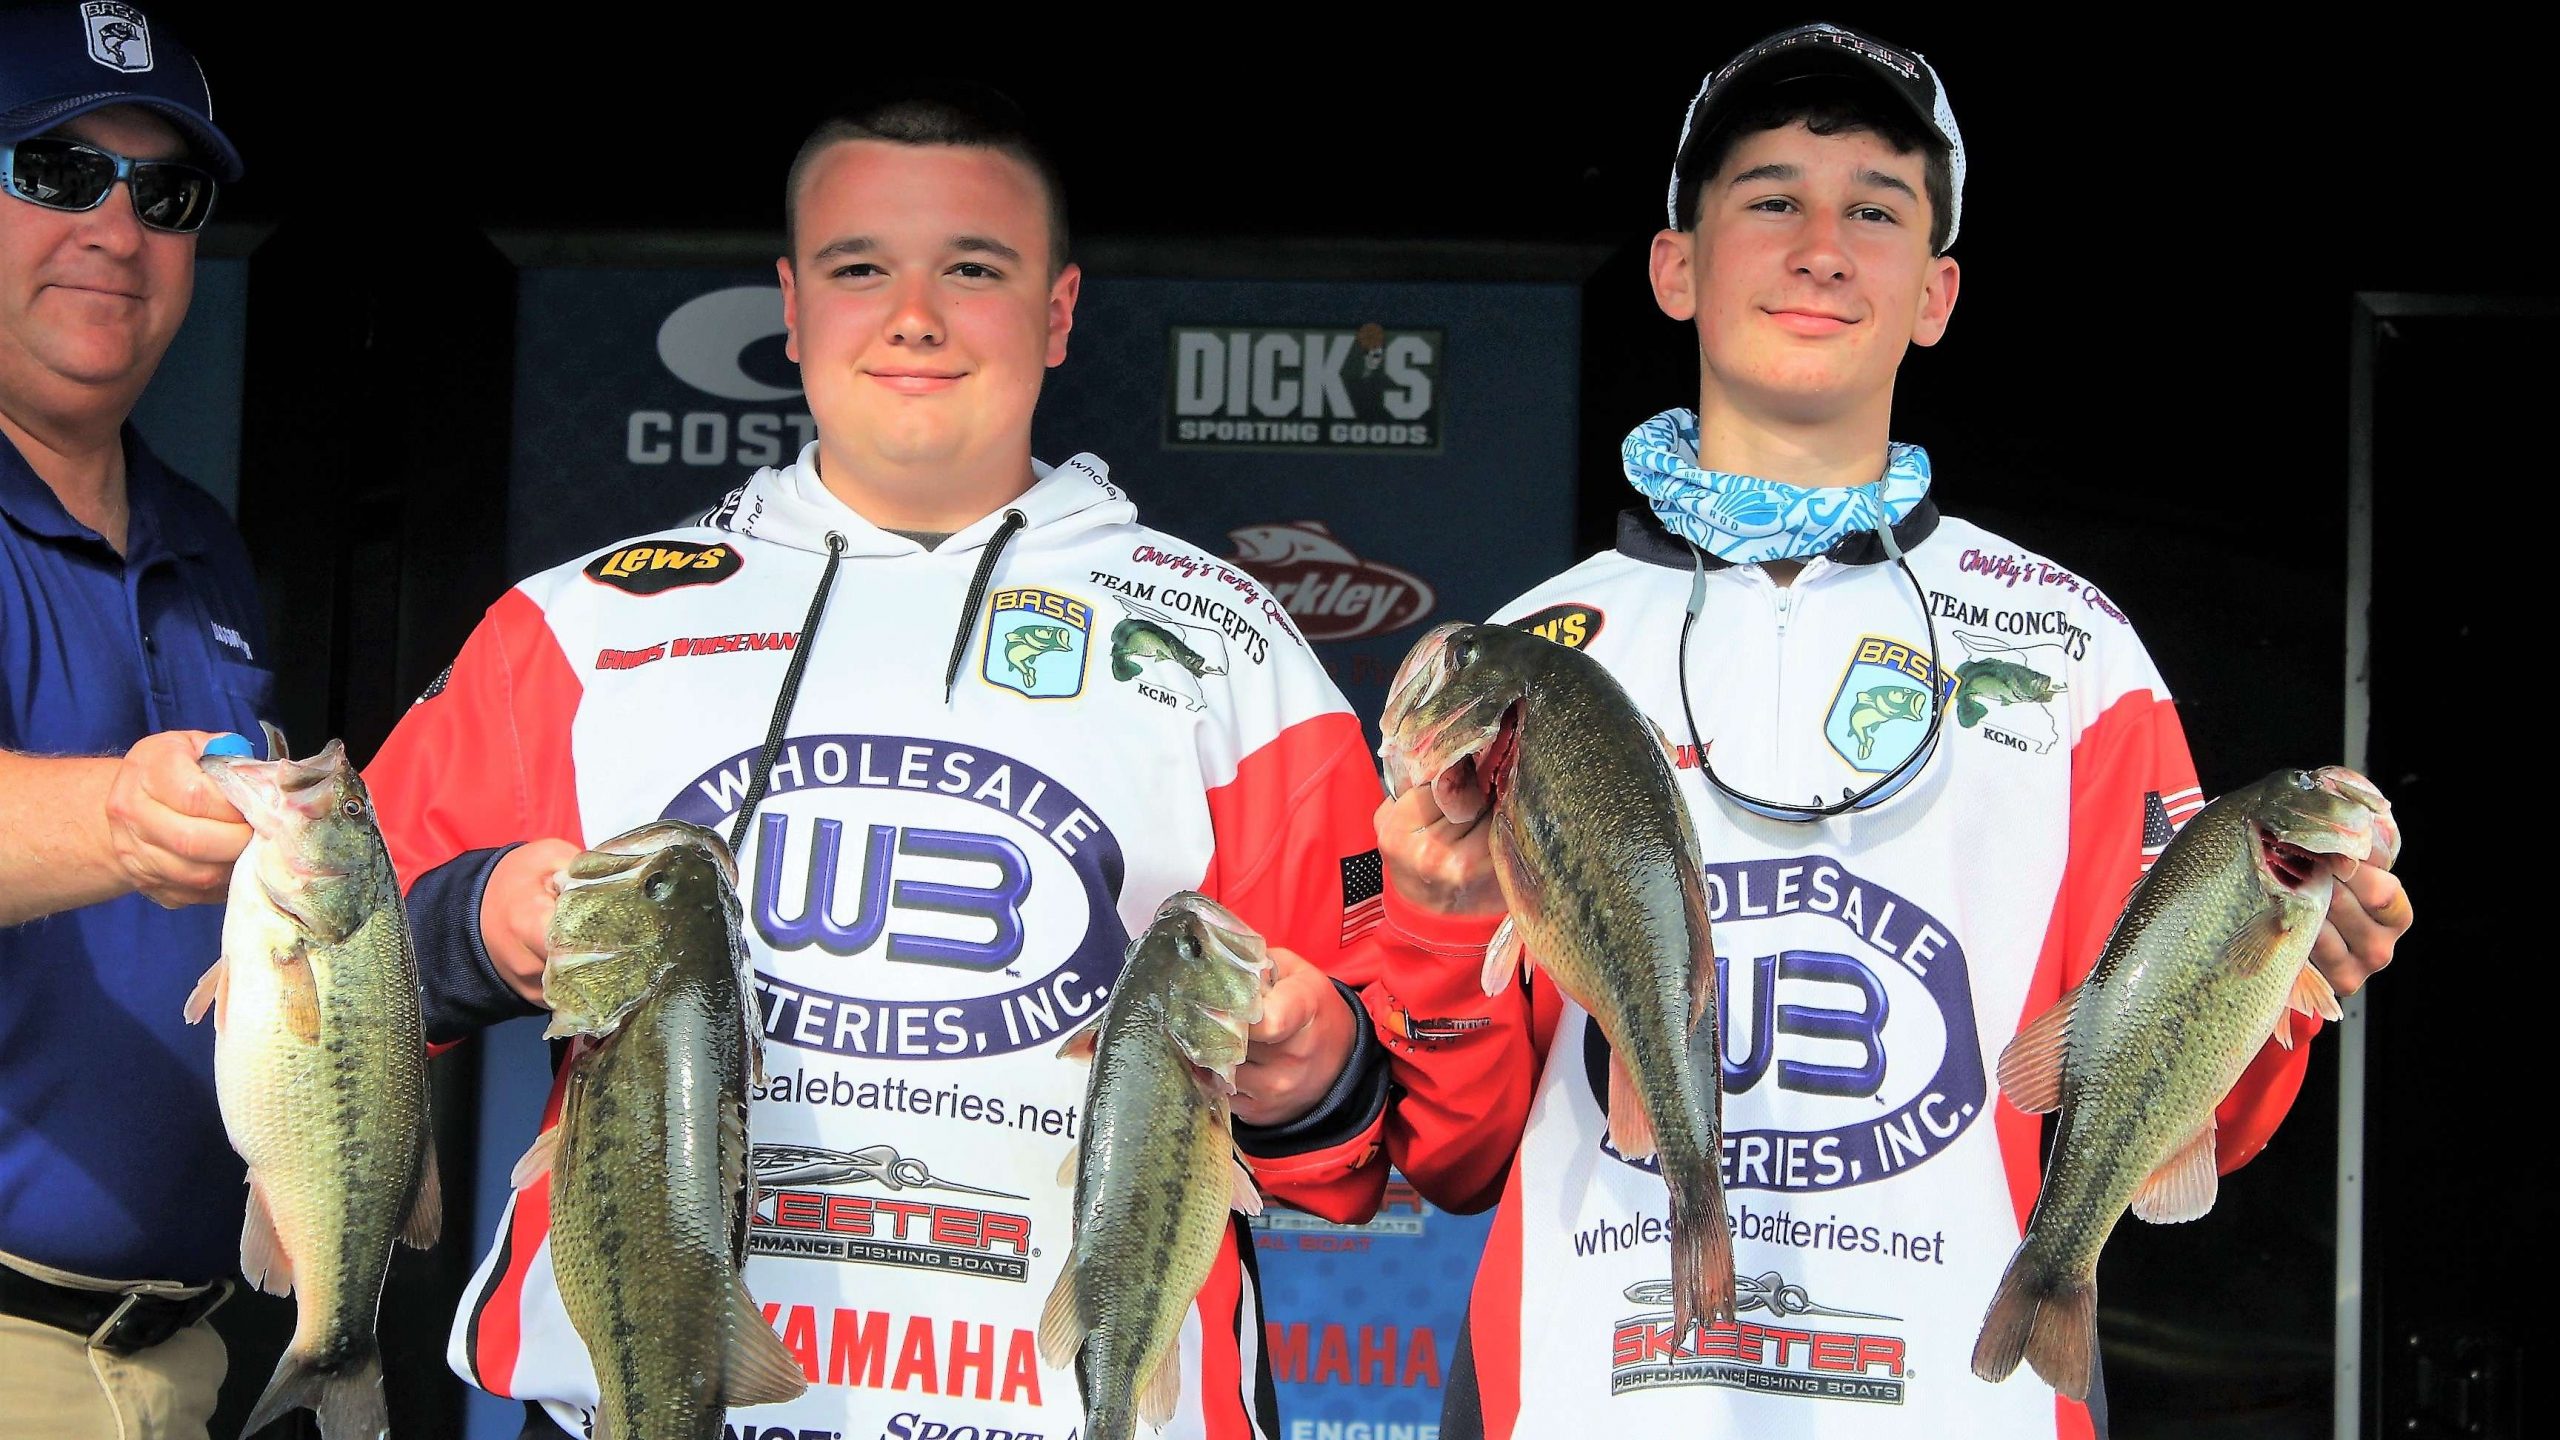 And here comes the haul of the day courtesy of Trevor Whisenant and Brett Lasley from the Kickback High School Bass Club in Kansas. They weighed five bass that totaled 16-8 pounds.